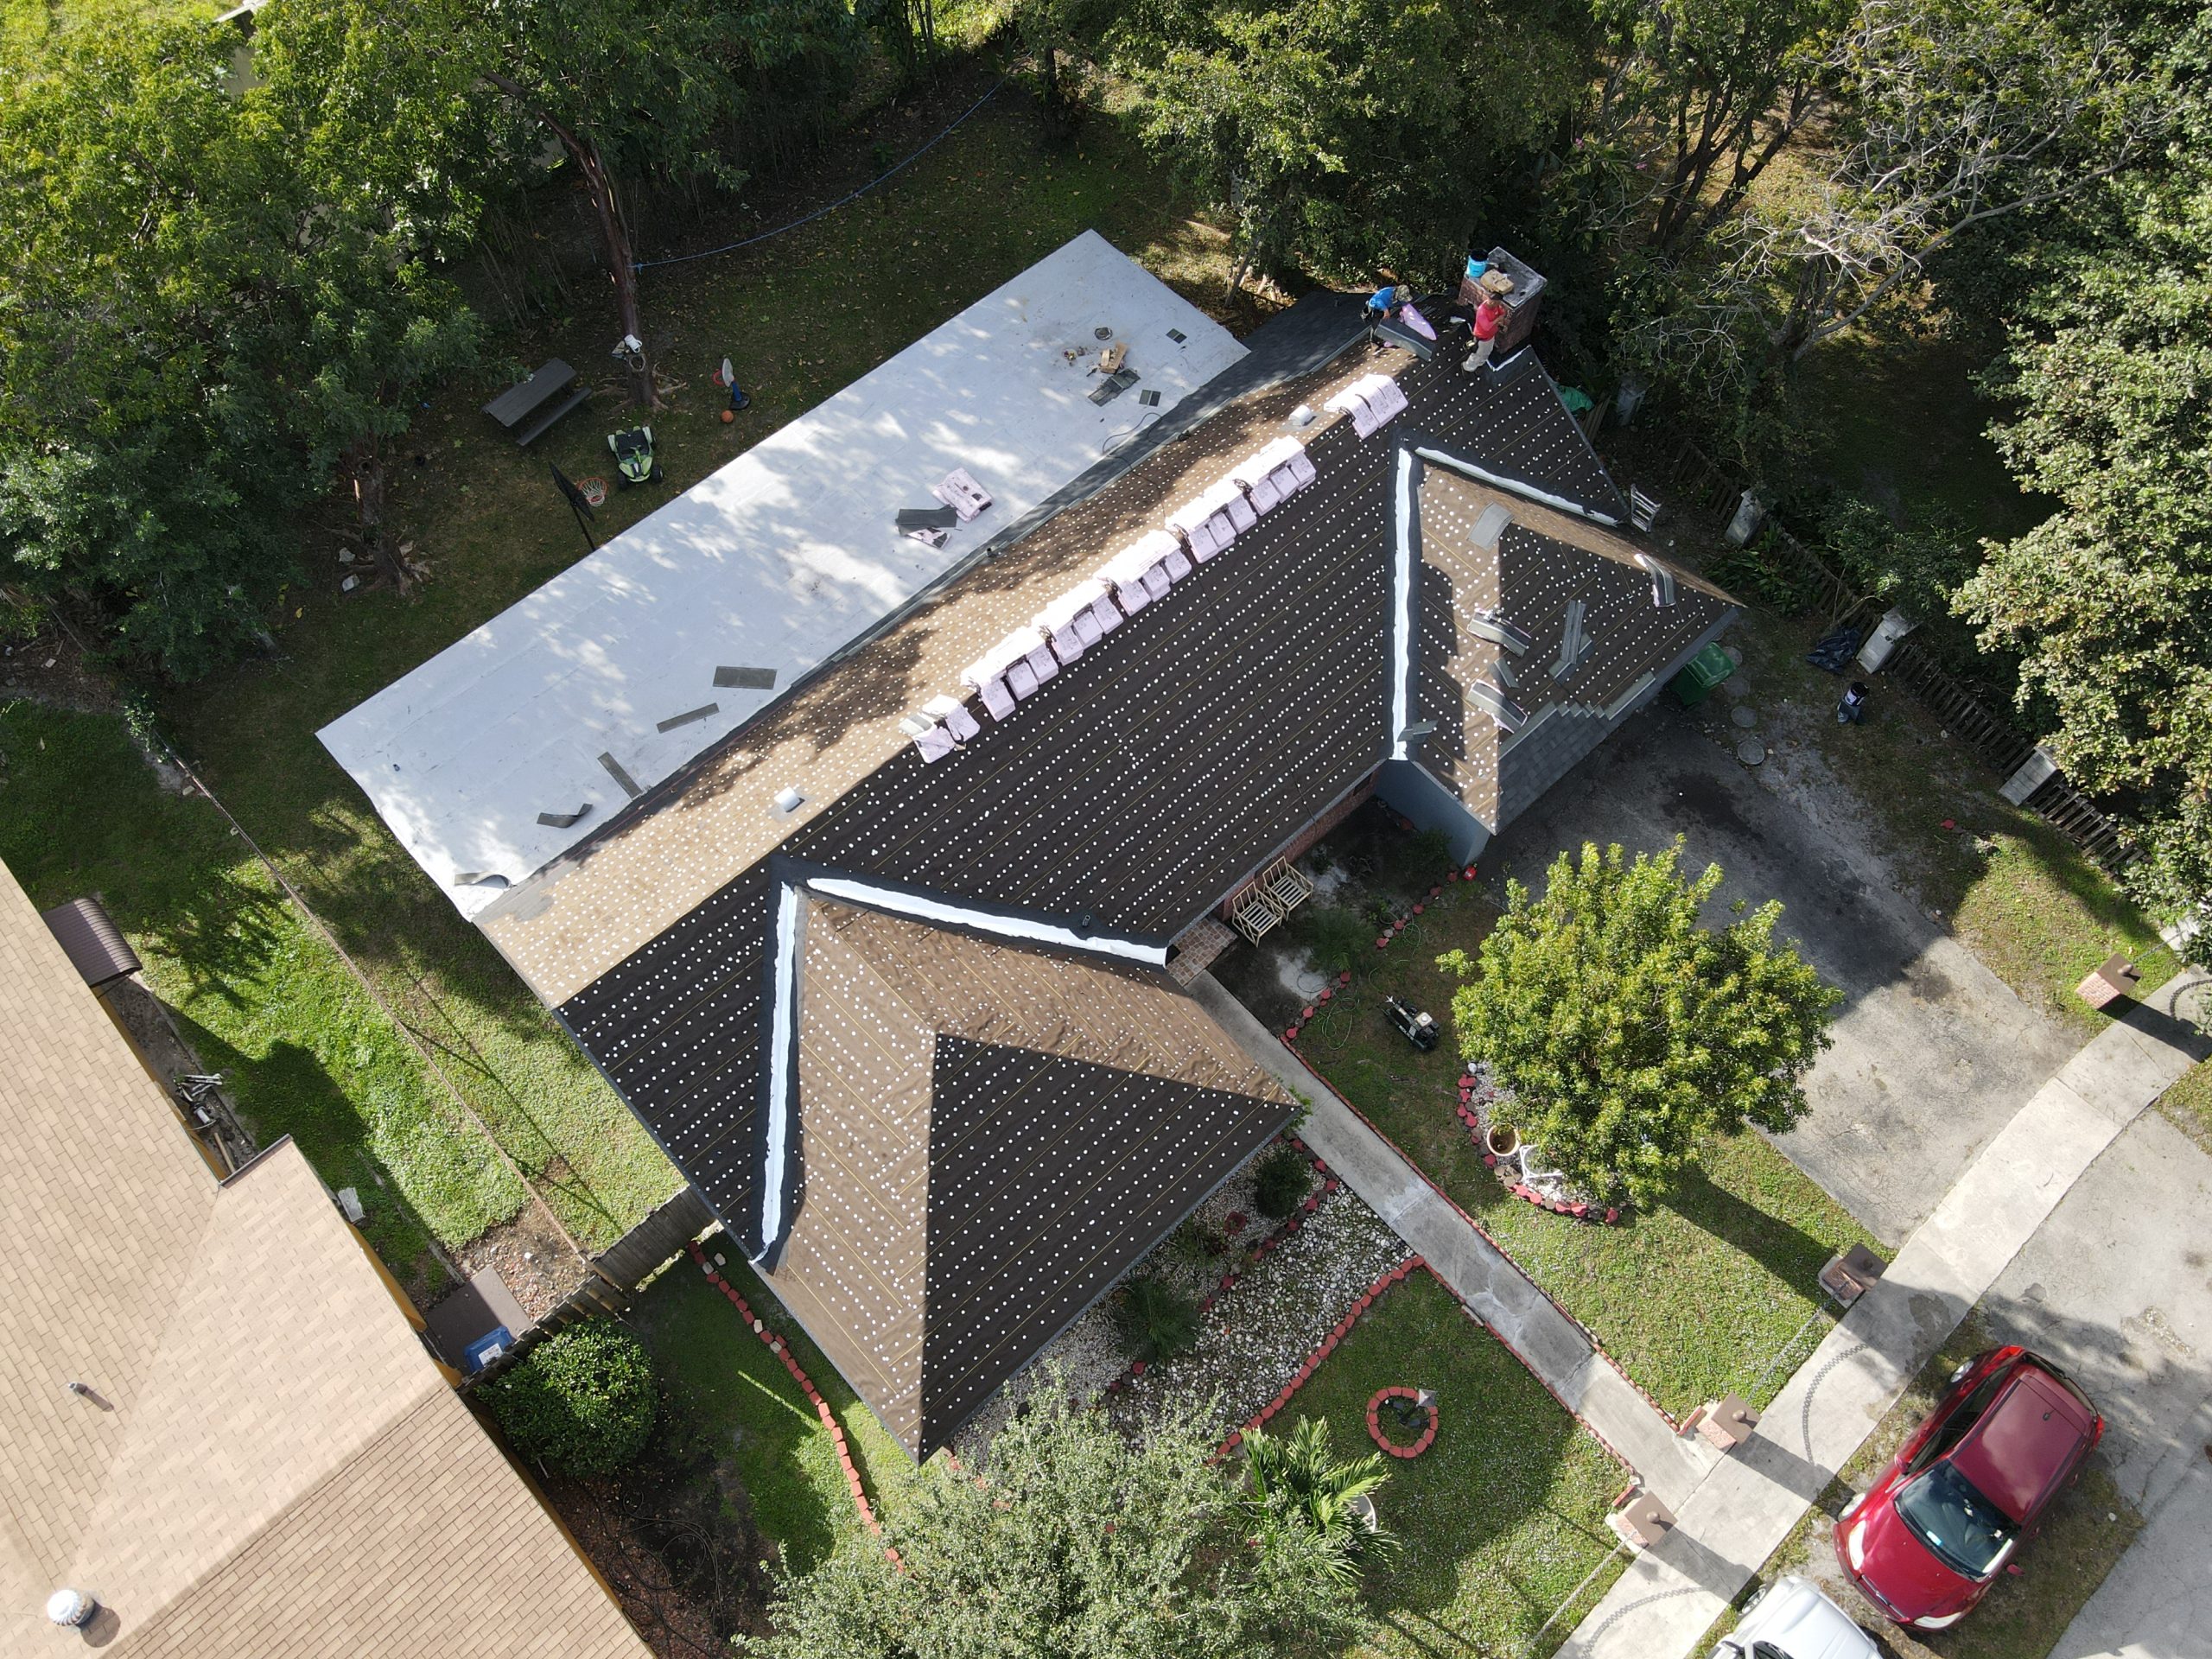 All America Construction Services - South Florida's Premier Roofing Company